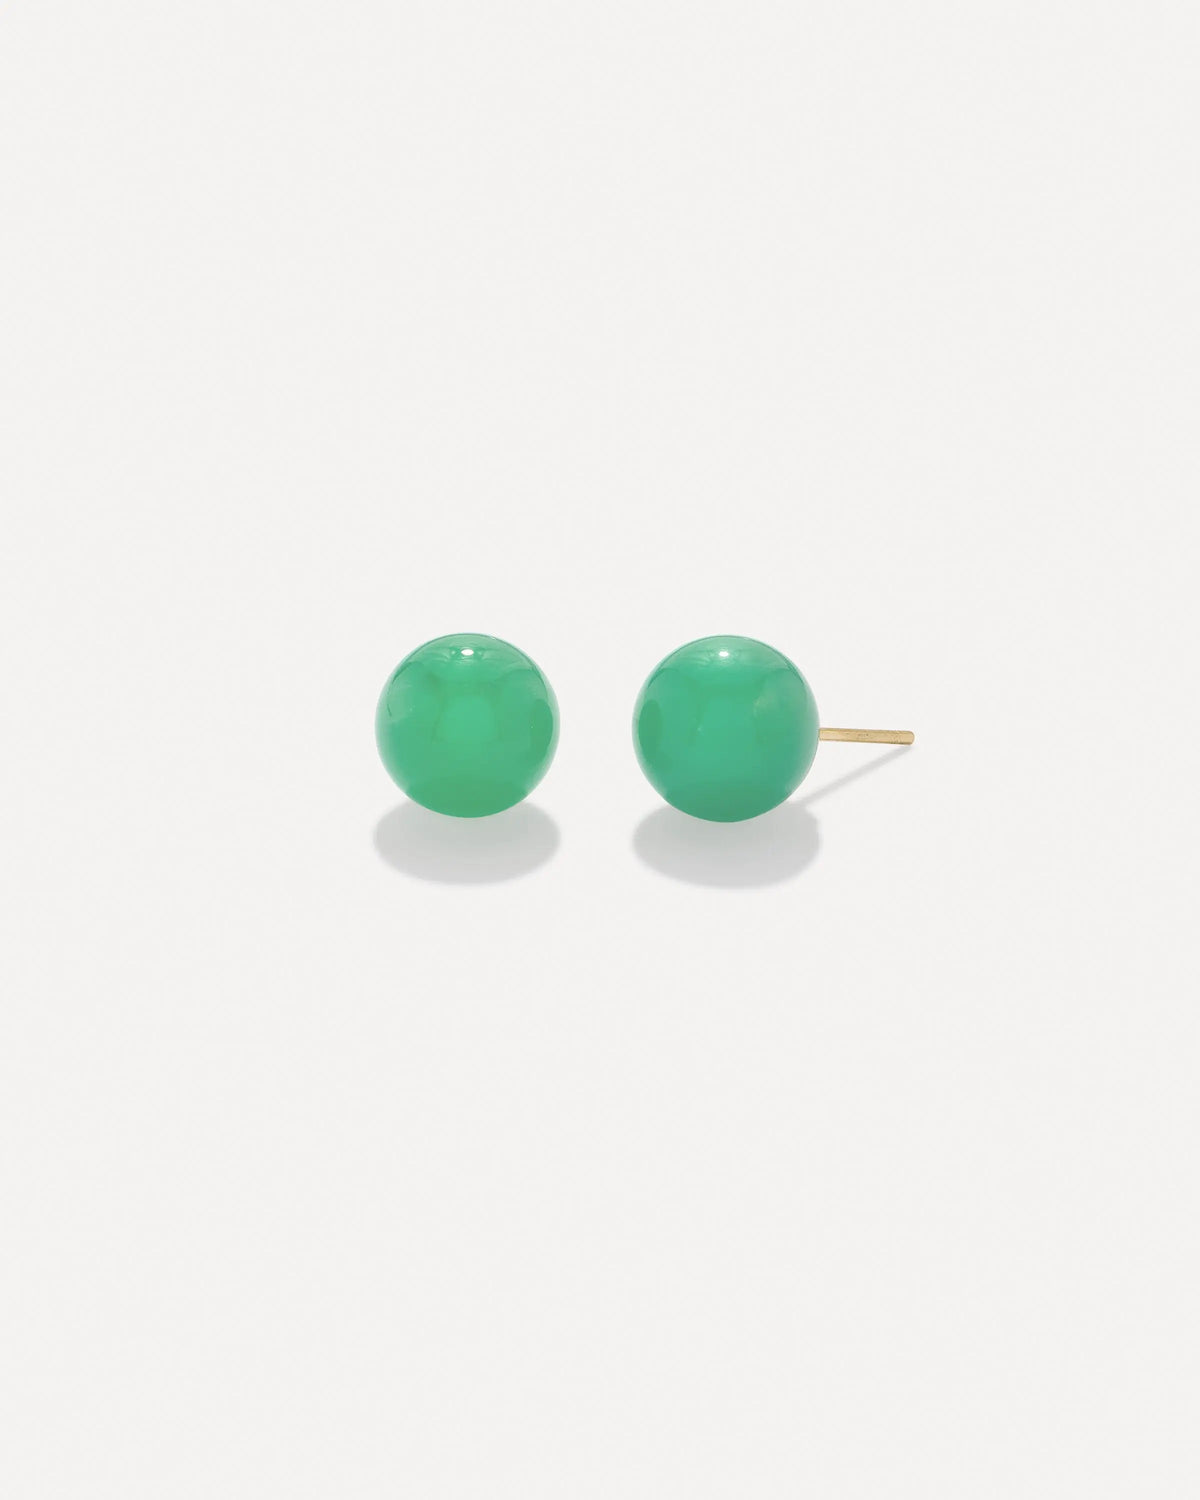 18k yellow gold studs in chrysoprase in 11mm  Earring weight 2.5 grams each Post and Nut Closure Designed and handmade in Los Angeles If an item is out of stock, please allow 3-6 weeks for delivery  Designed by Irene Neuwirth